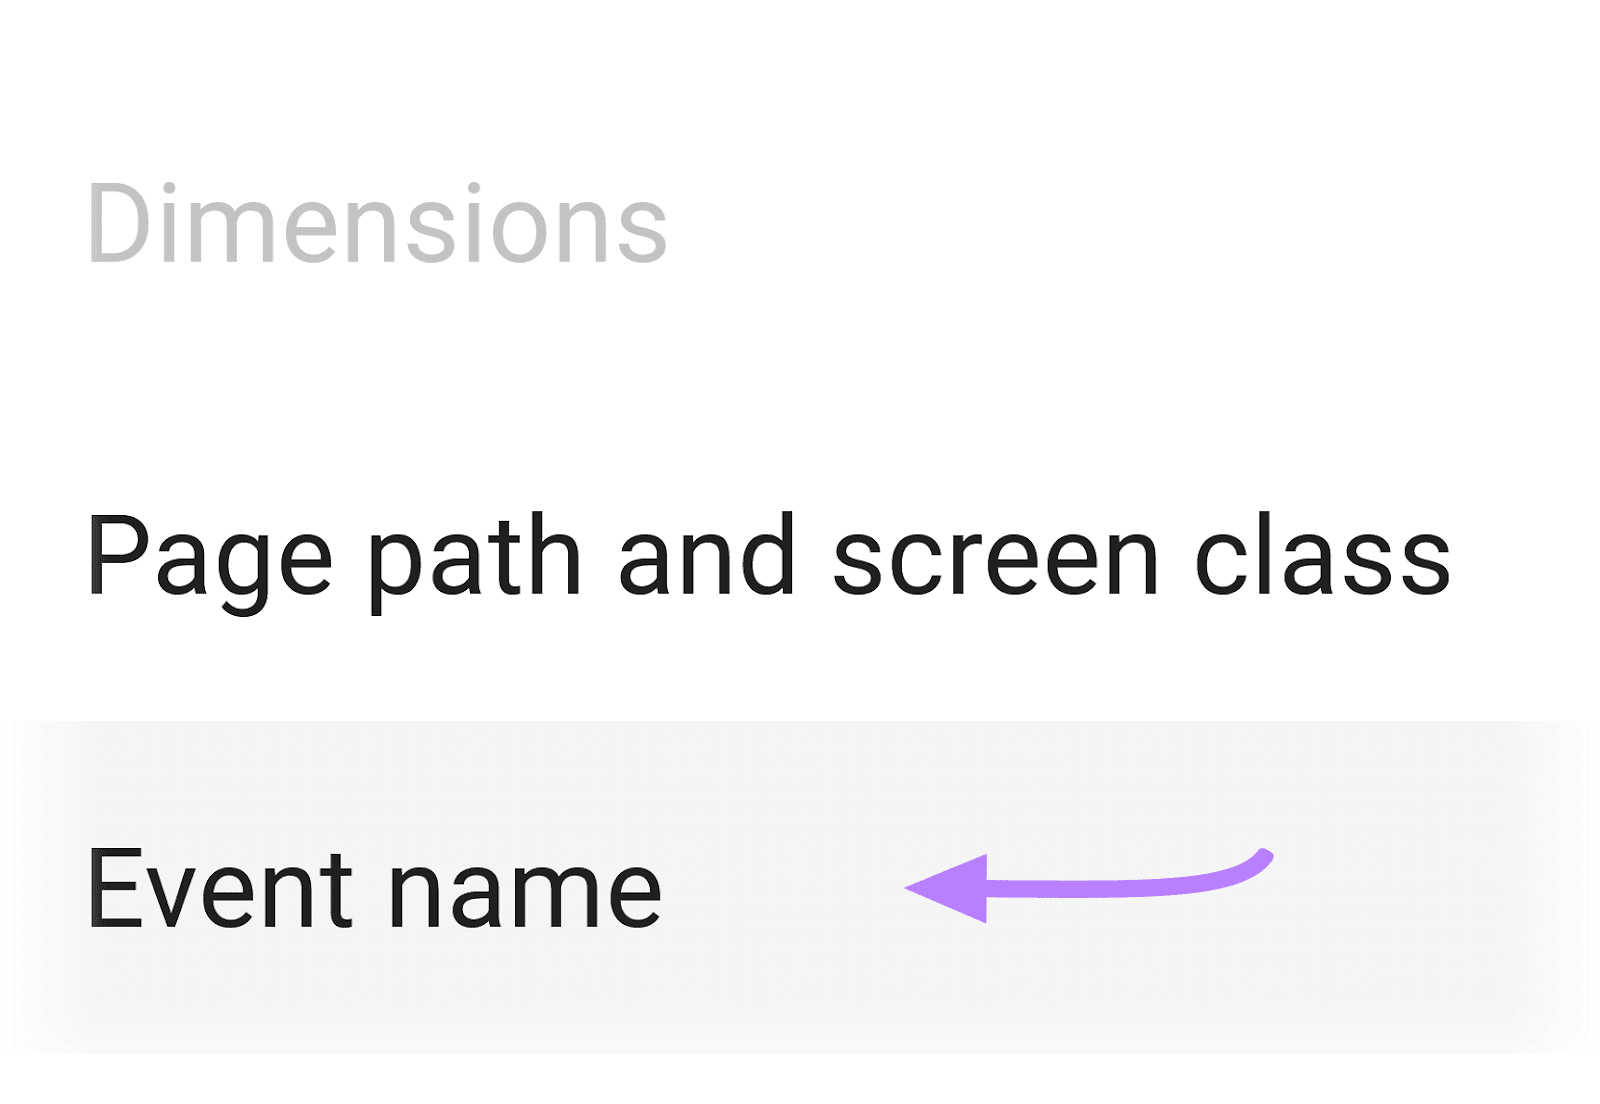 “Event name" selected under "Dimensions" section